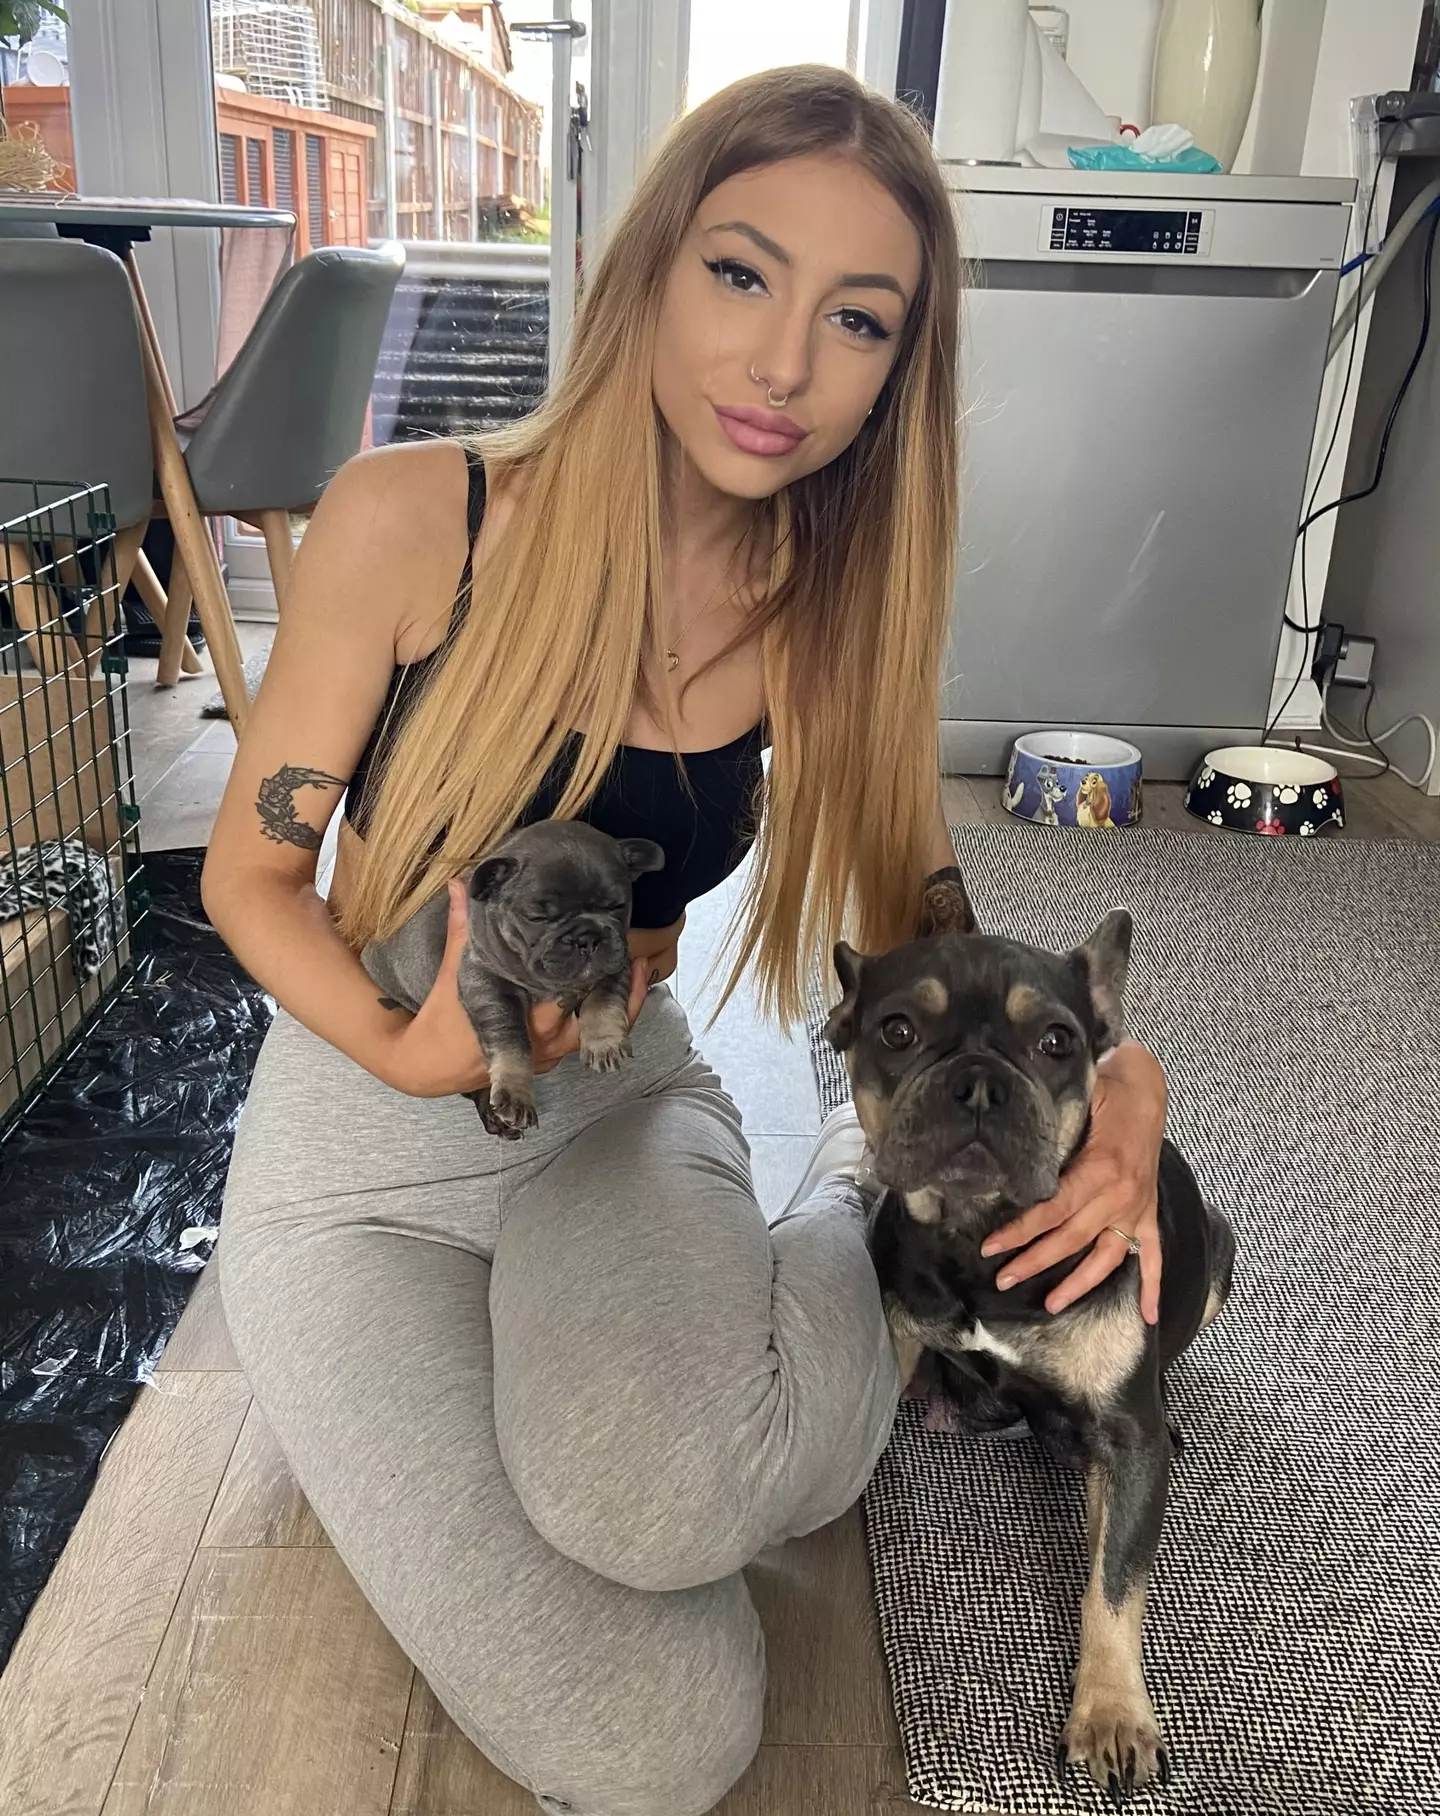 Megan's mental health 'plummeted' after the loss of her puppy. [